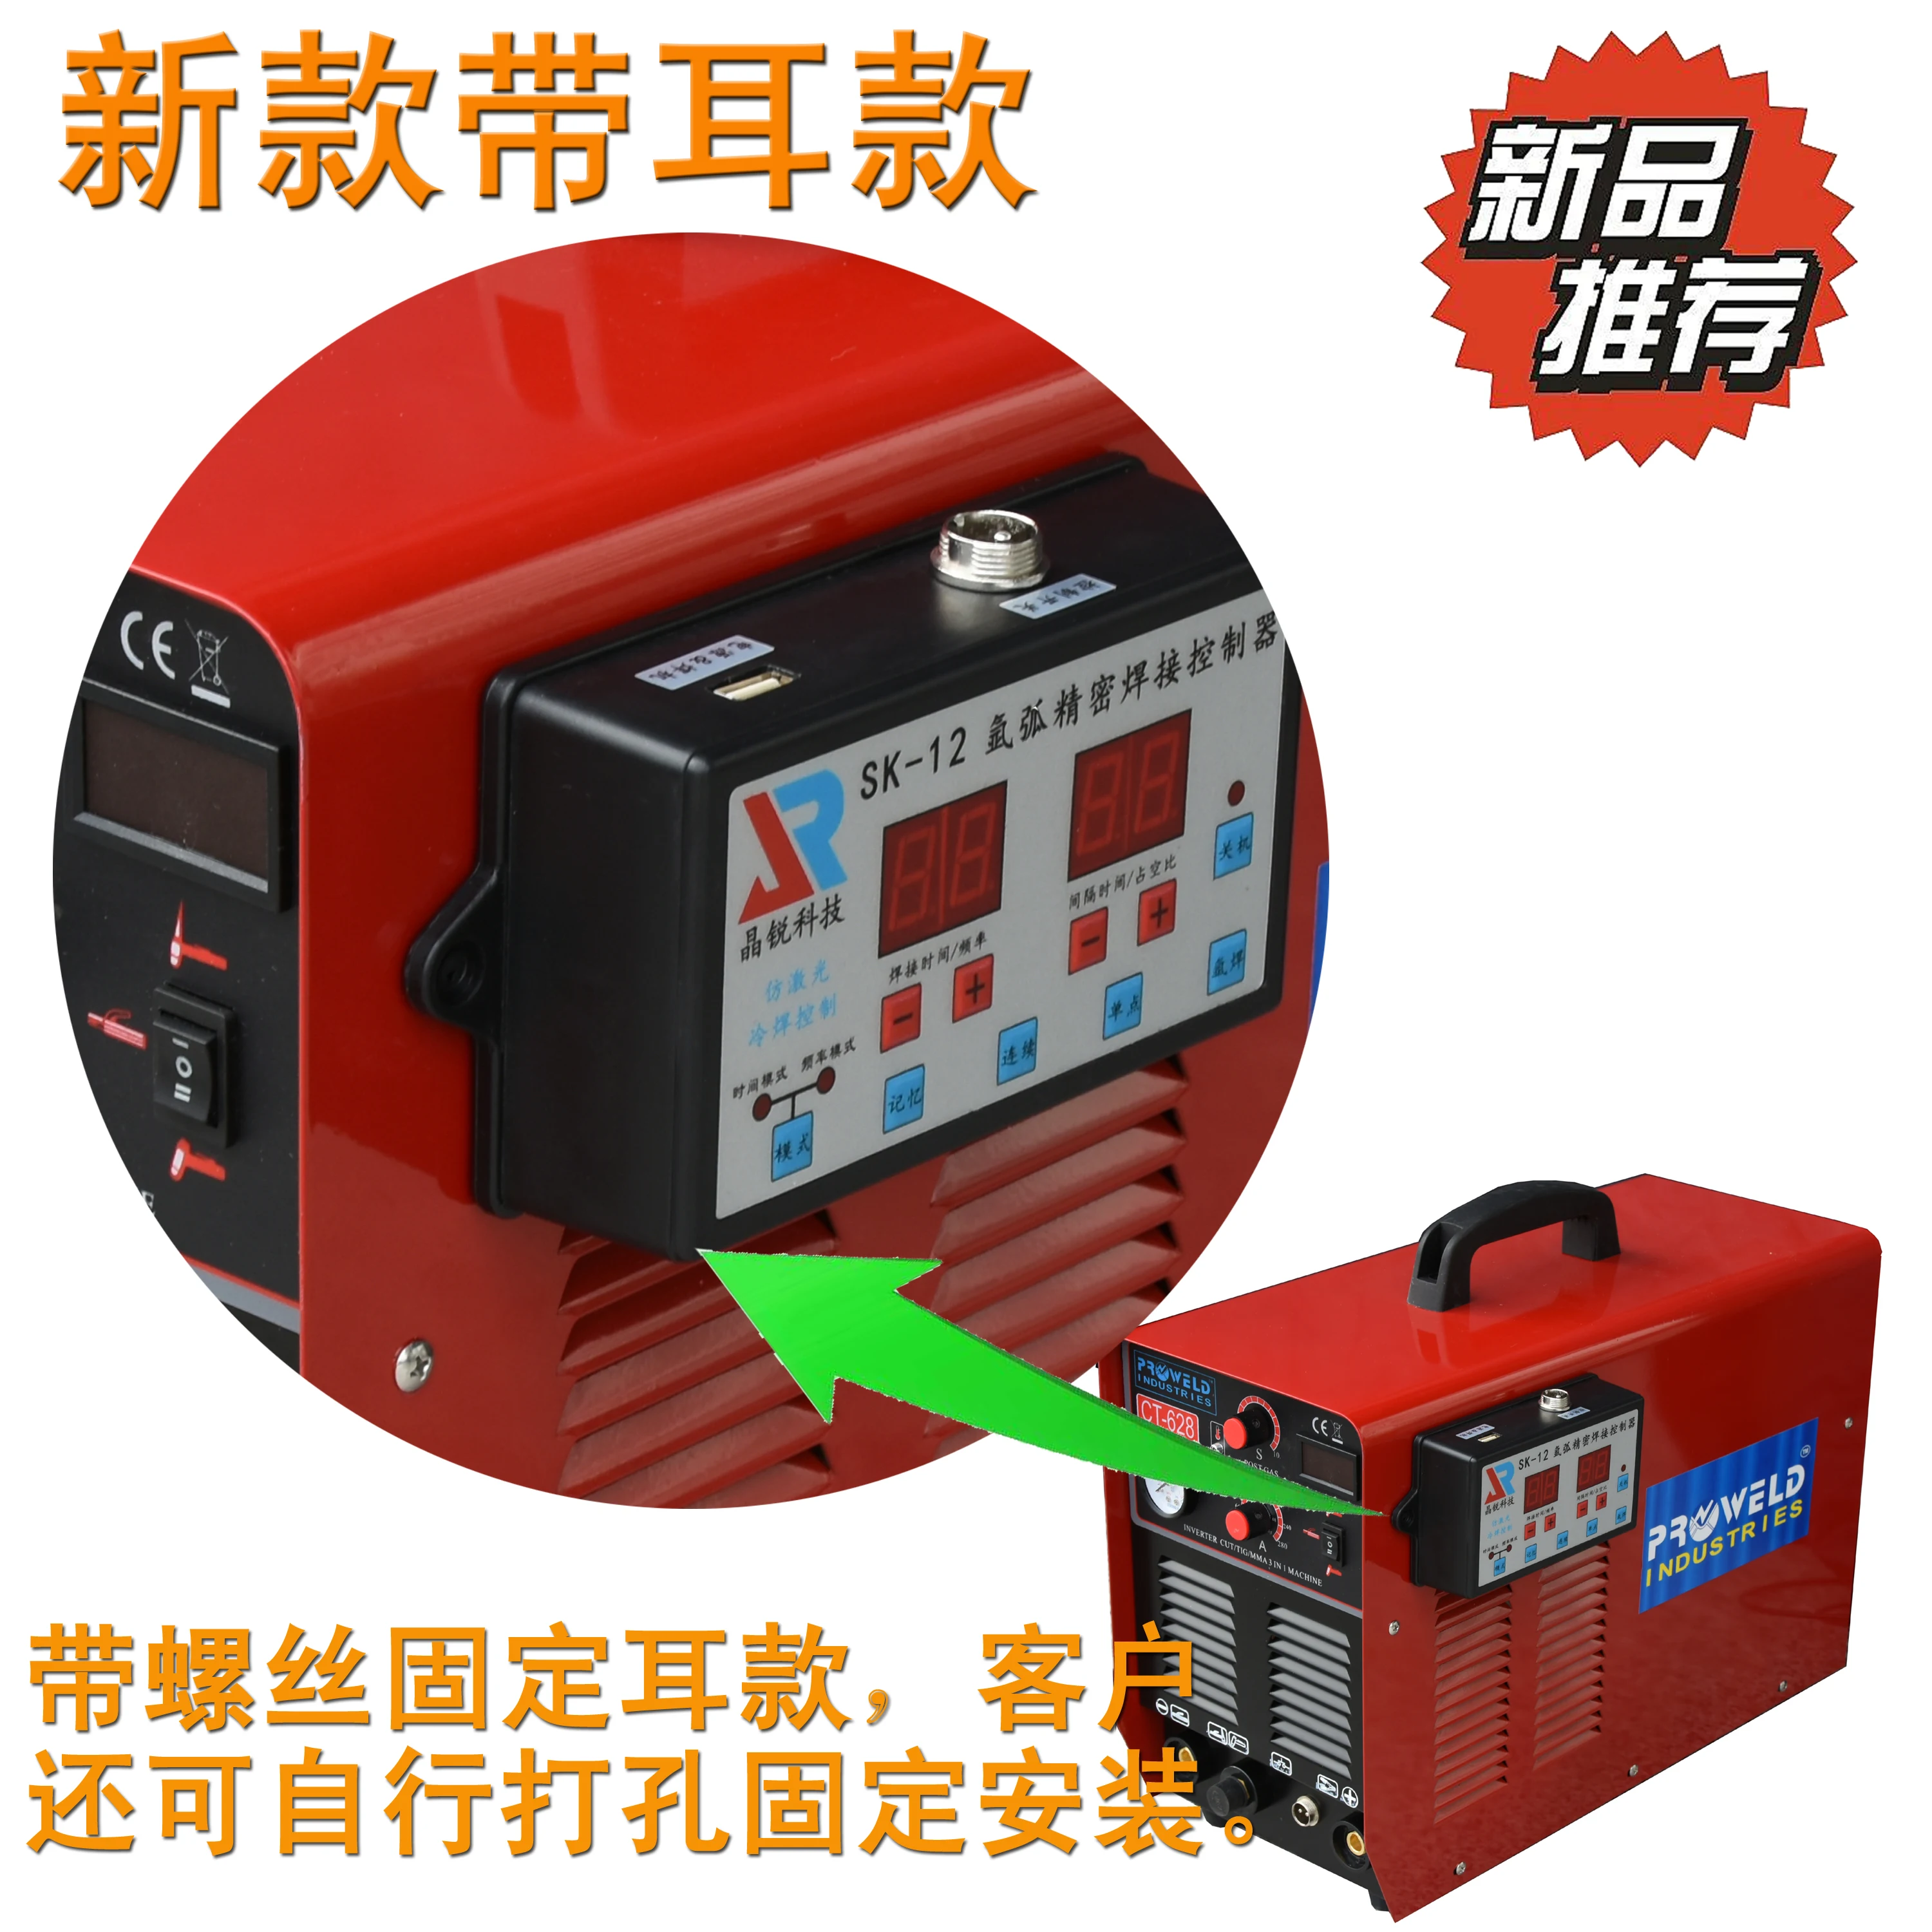 Tig Welding Machine Modified Cold Welding Machine Controller Imitating Laser Welding Stainless Steel Mold Sk 12 Controller Smart Home Control Aliexpress